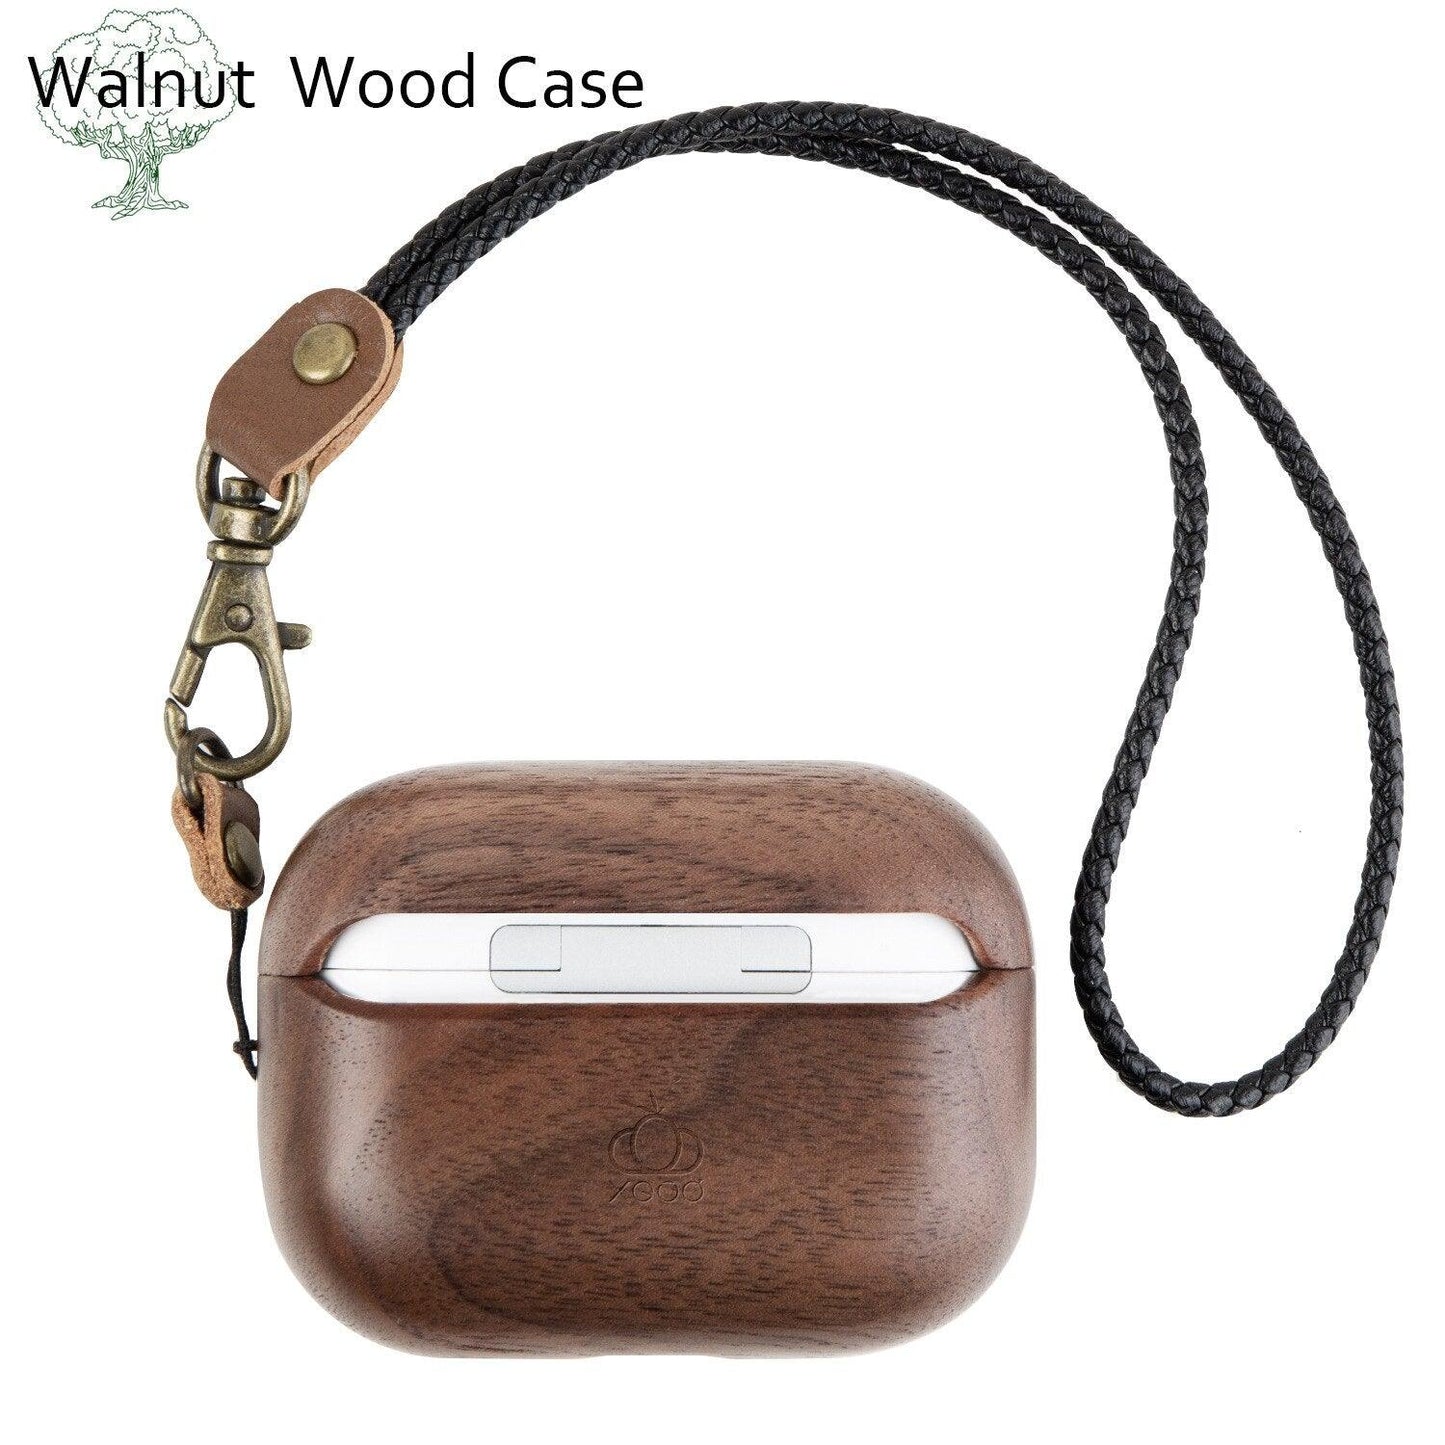 Wooden Airpods Case - Earth Thanks - Wooden Airpods Case - natural, vegan, eco-friendly, organic, sustainable, airpods, AirPods case, biodegradable, environmentally-friendly, organic, phone, phone accessories, slim design, sustainable, sustainably-sourced, wood, wooden